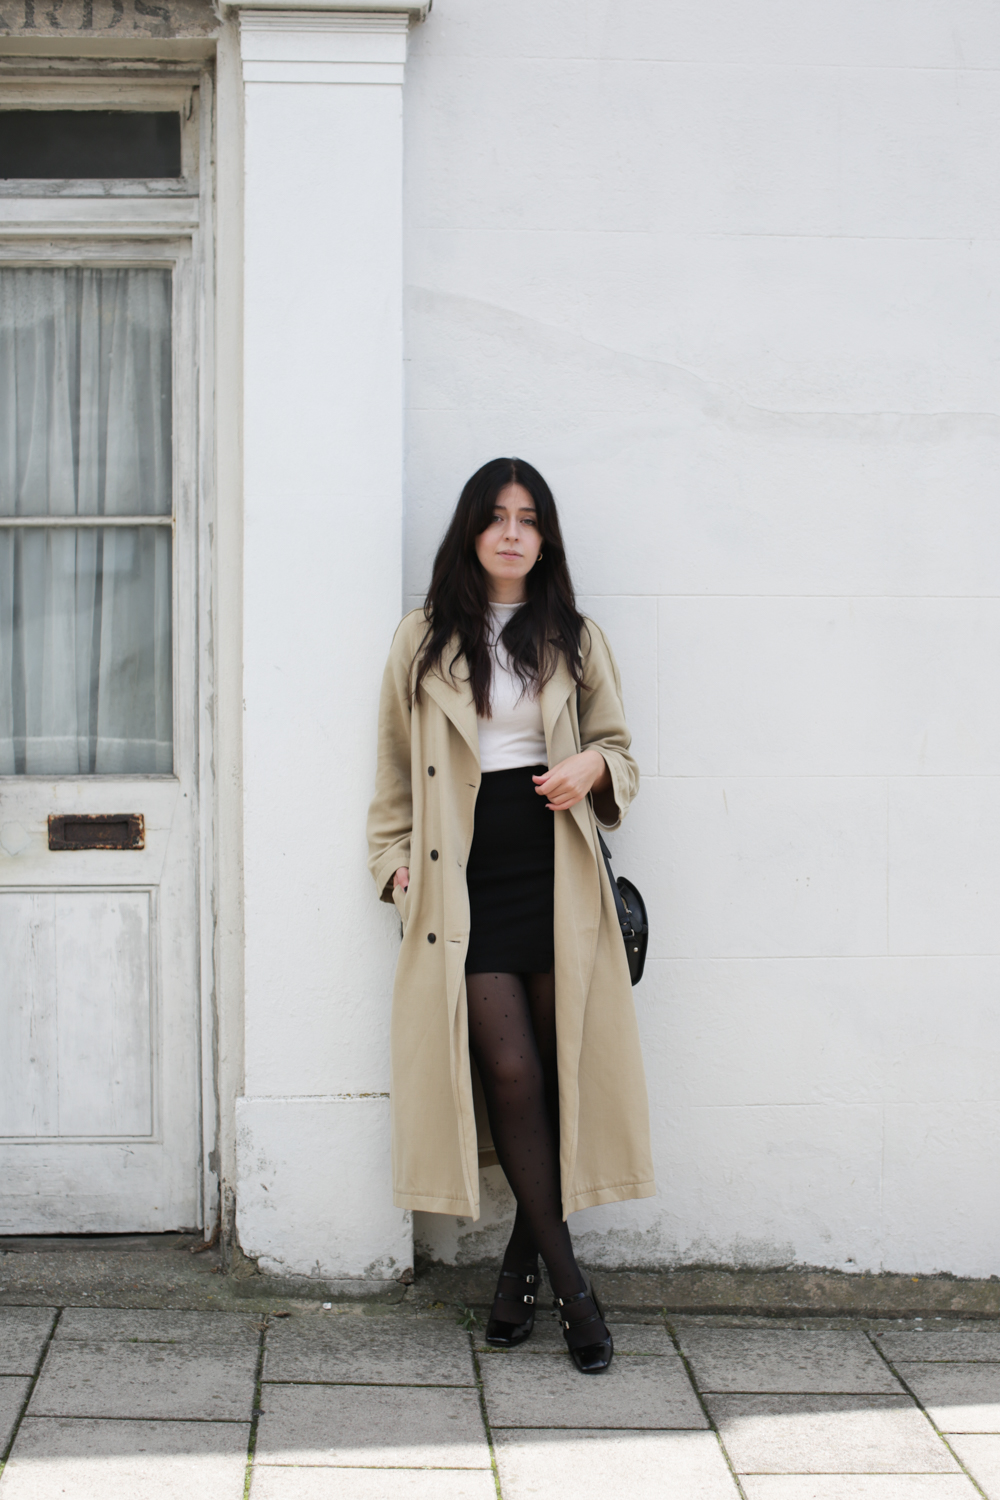 Besma wears Jonak Mary Janes with trench coat and autumnal outfit